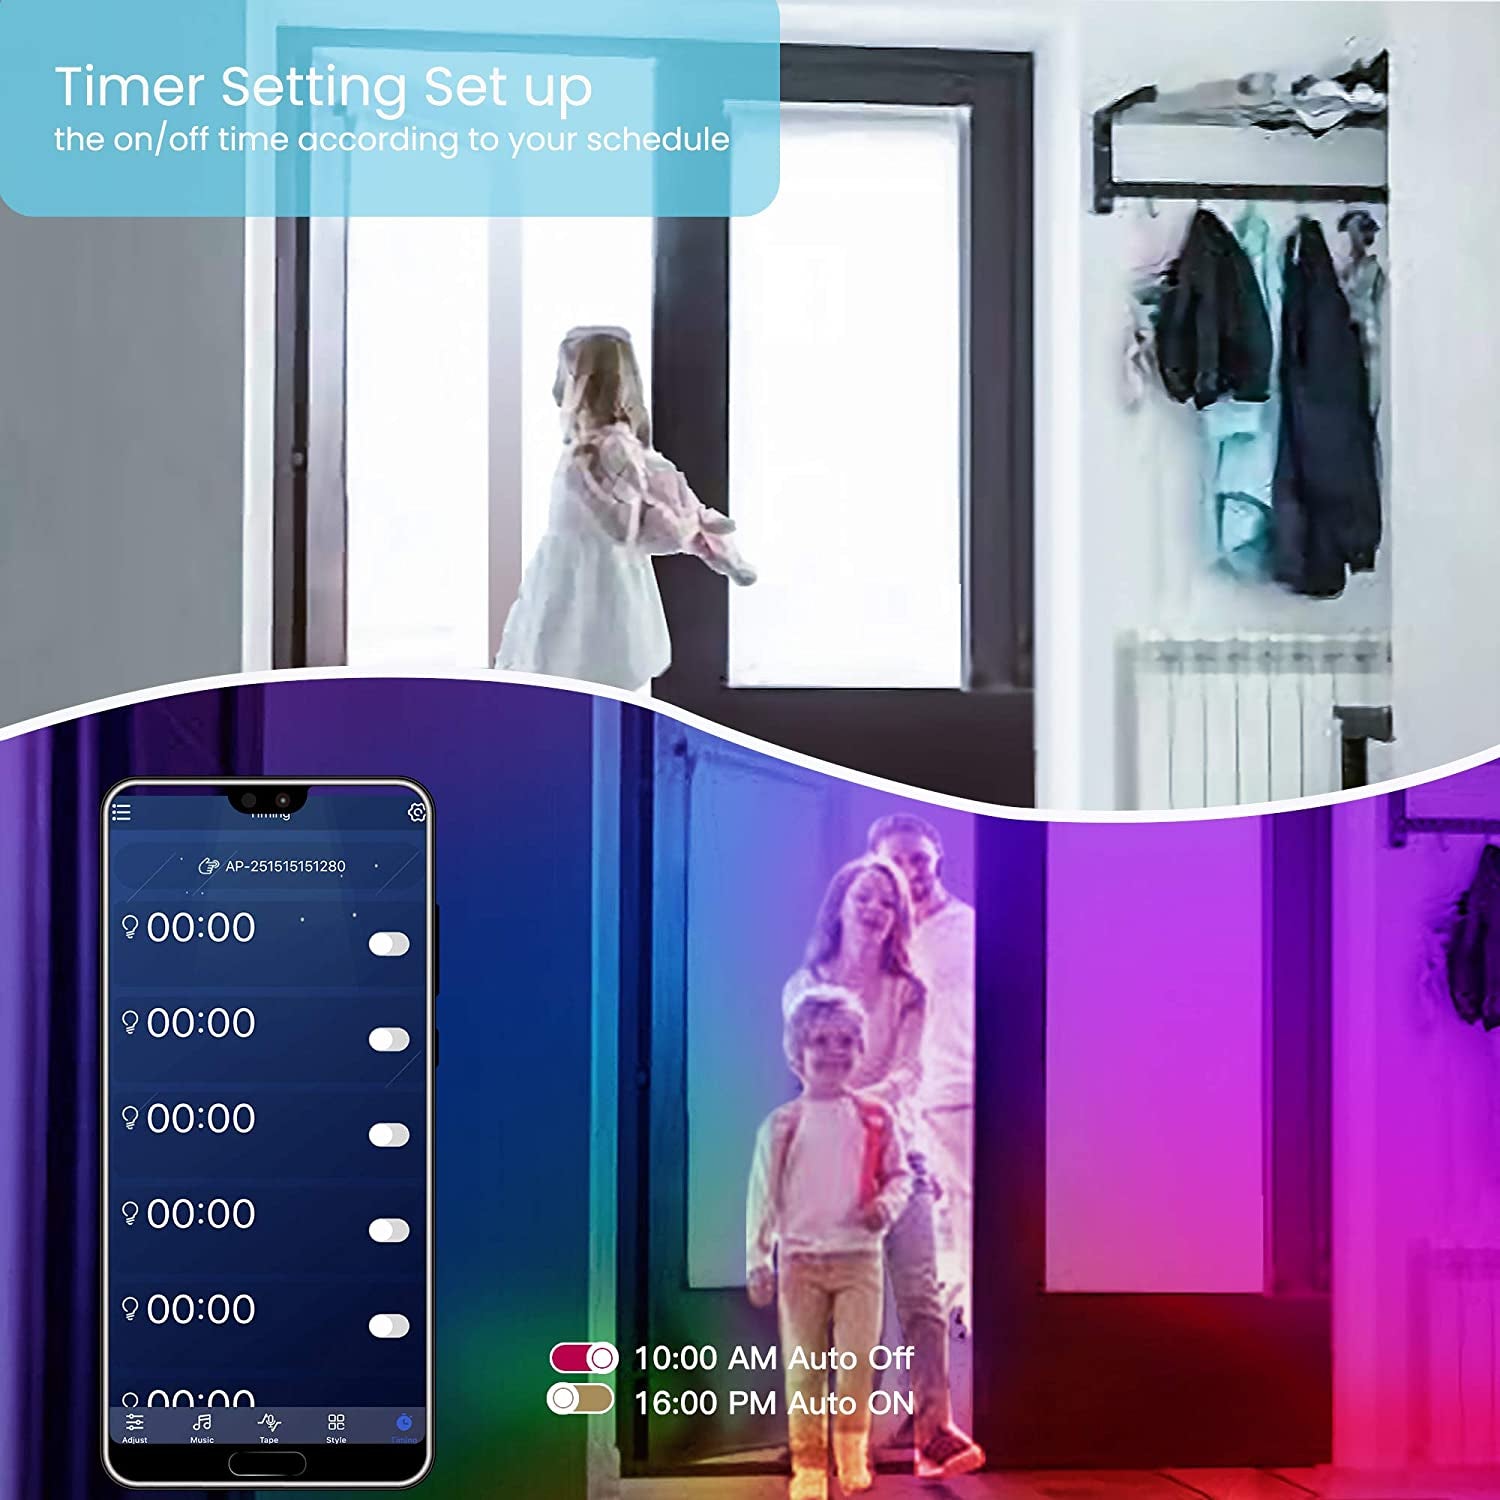 50 FT Long LED Strip Lights,  Bluetooth LED Lights for Bedroom, Color Changing Light Strip with Music Sync, Smart Lights Controlled via Phone APP and IR Remote.